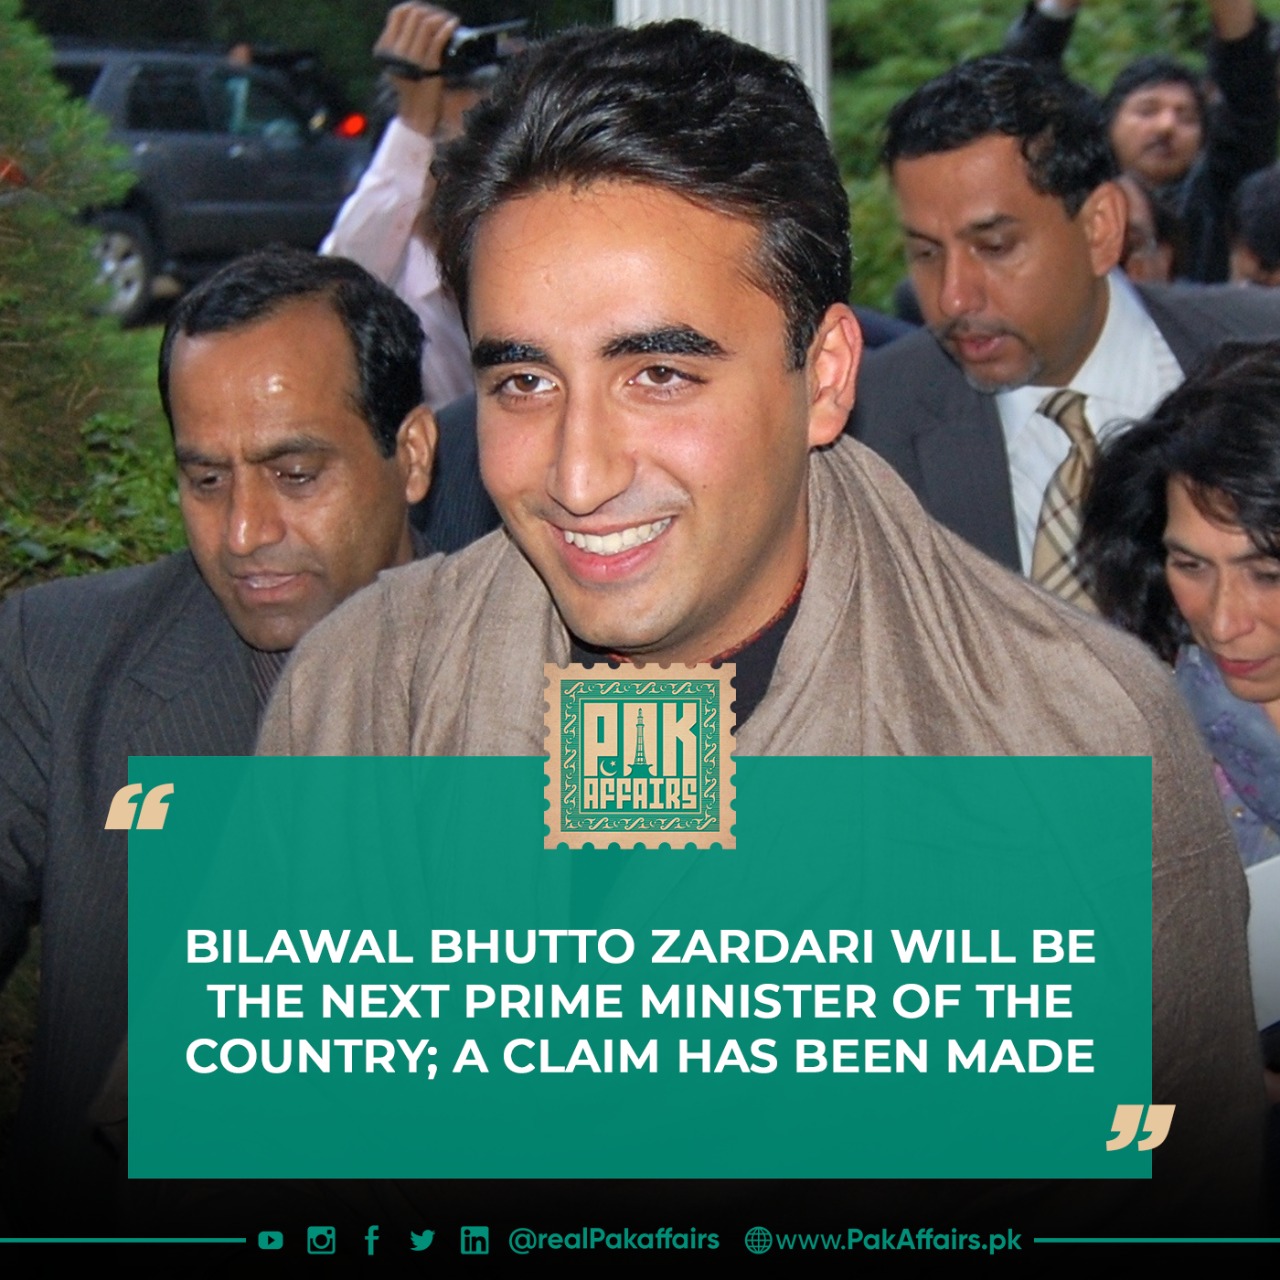 Bilawal Bhutto Zardari will be the next Prime Minister of the country; A Claim Has been Made